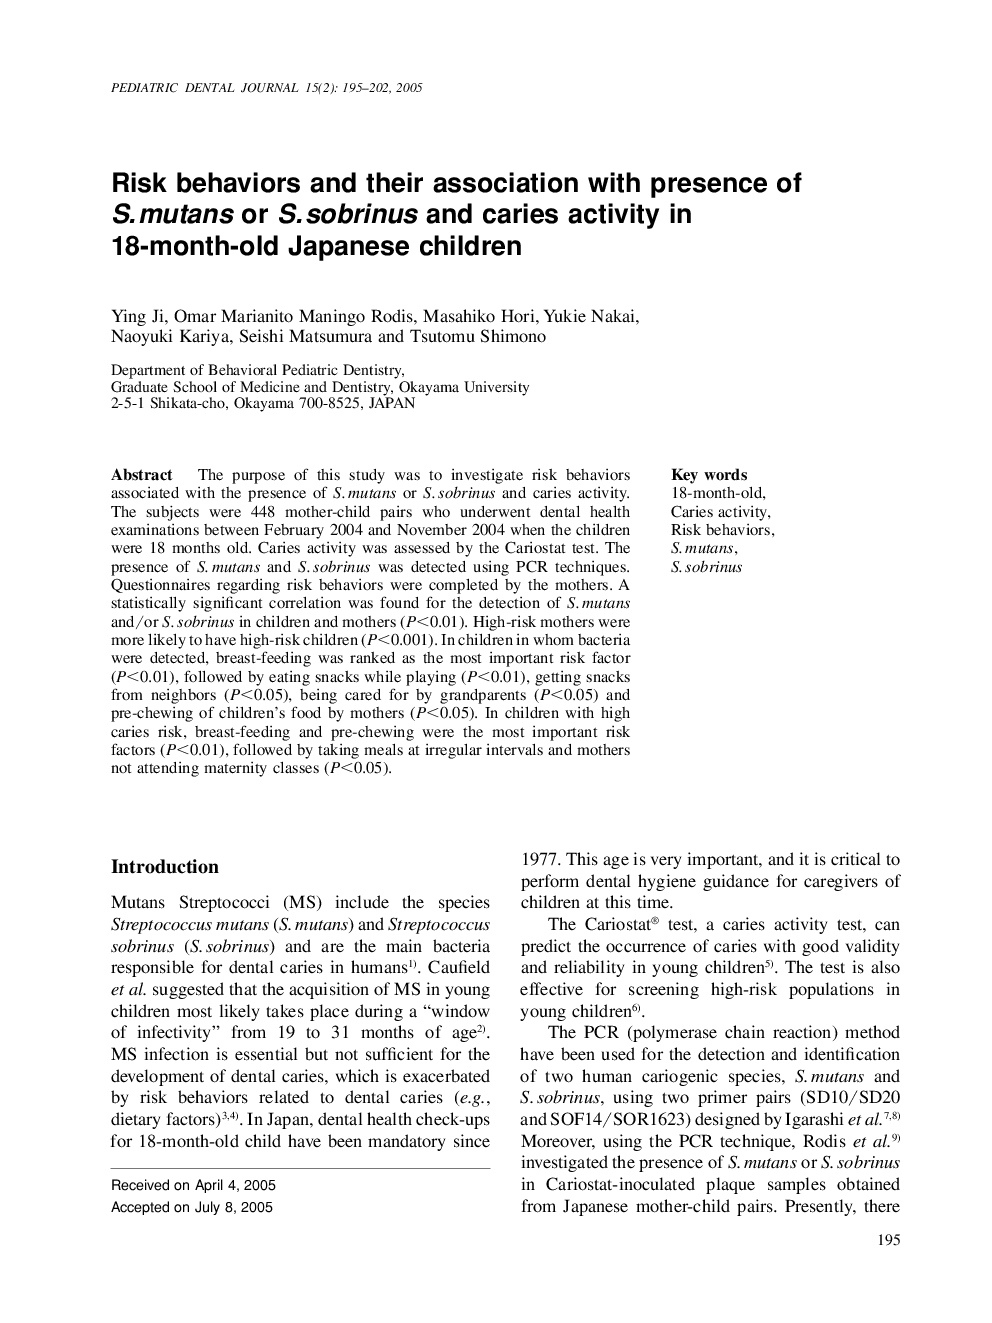 Risk behaviors and their association with presence of S.mutans or S.sobrinus and caries activity in 18-month-old Japanese children